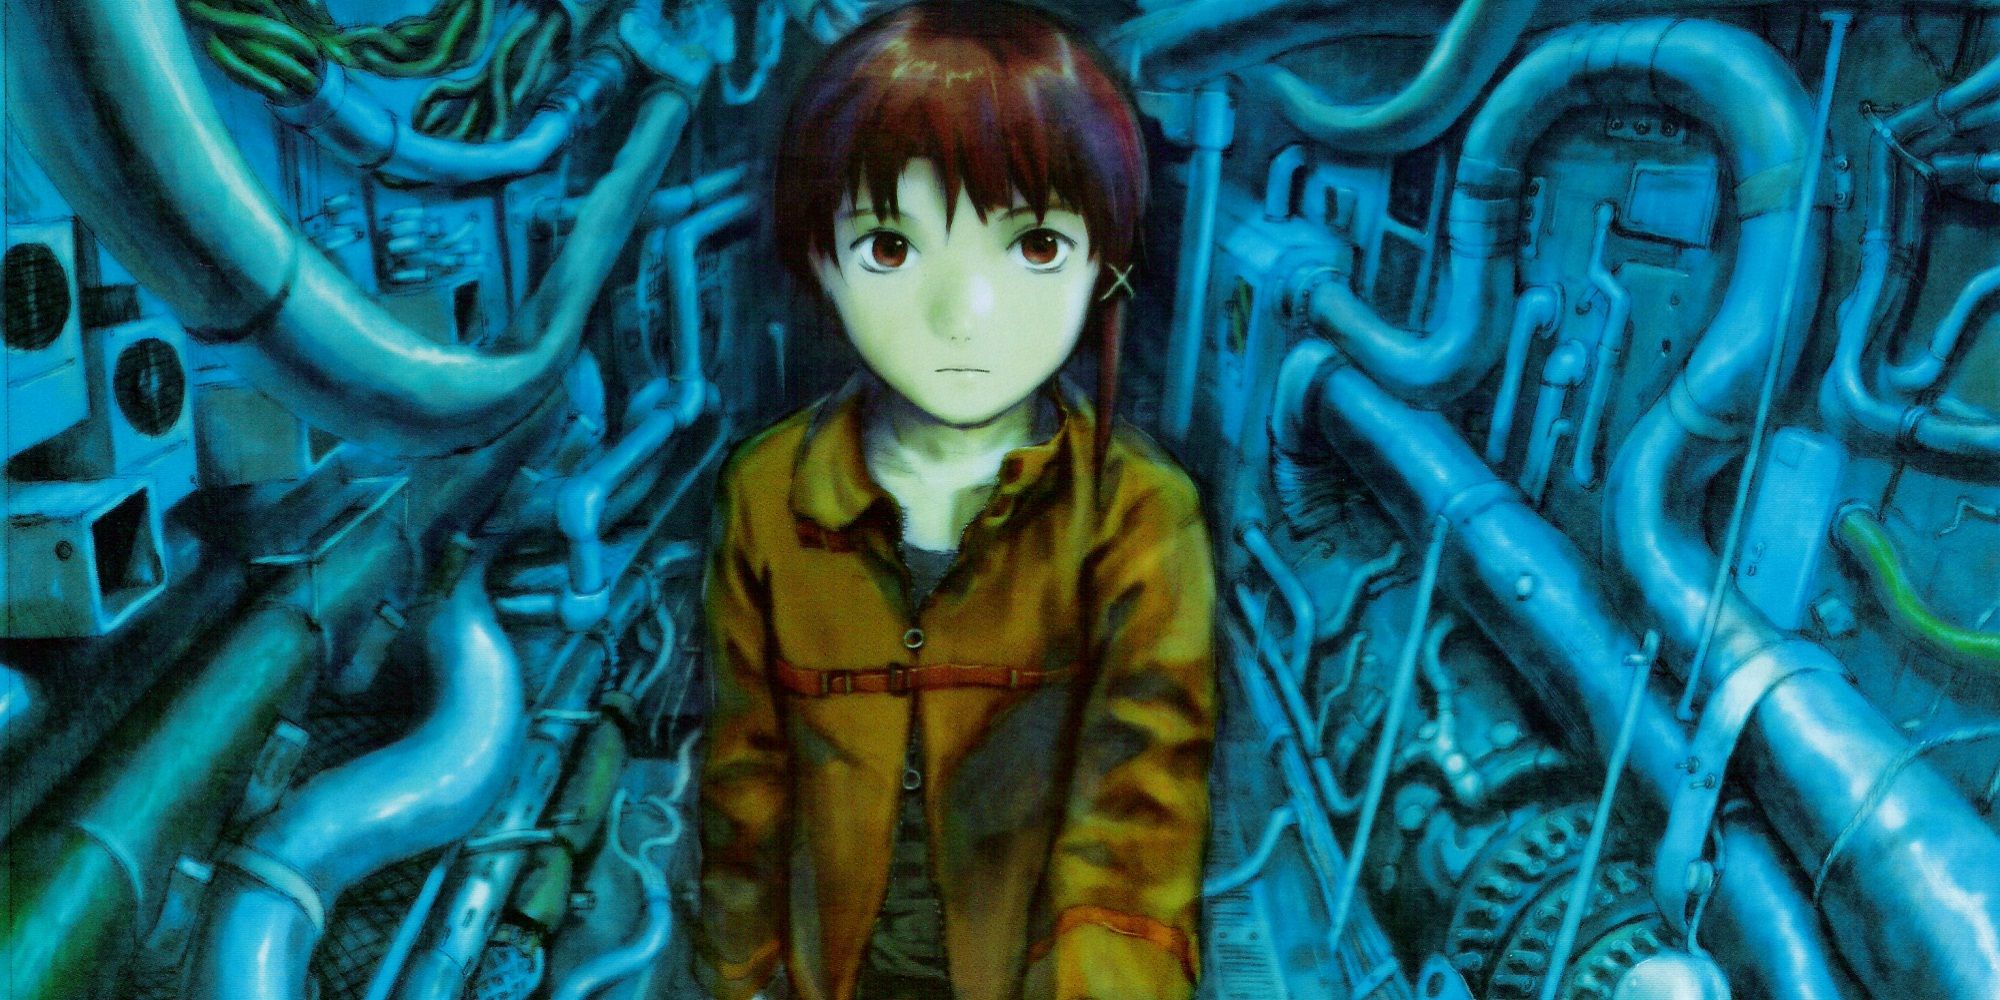 Lain standing amid the Wired in Serial Experiment Lain